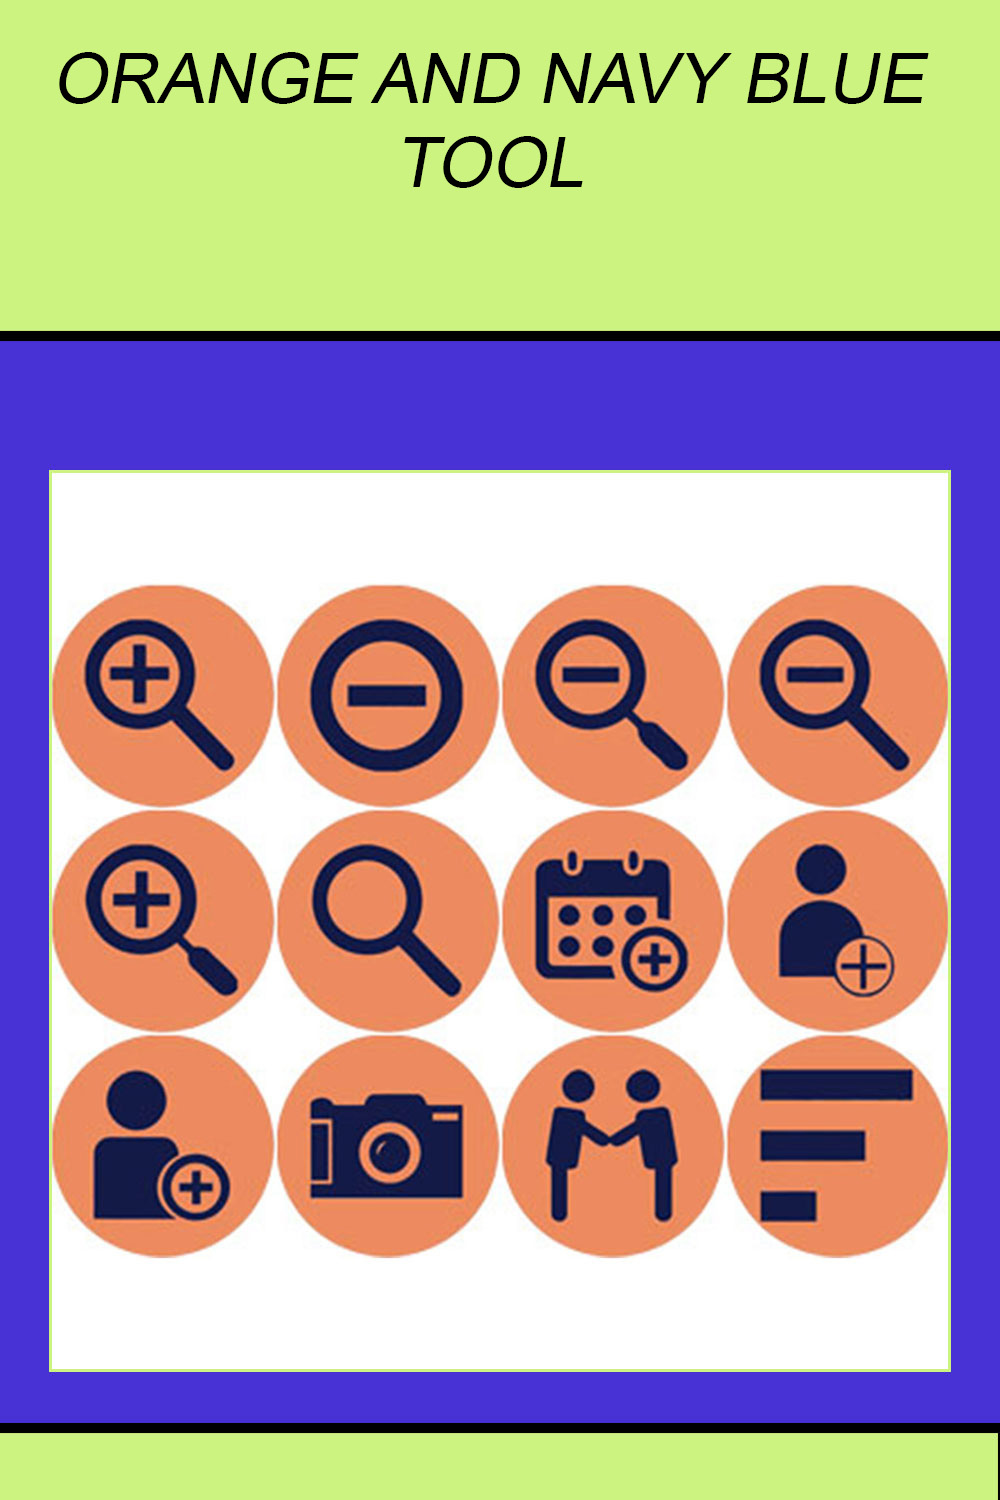 ORANGE AND NAVY BLUE TOOL ROUND ICONS pinterest preview image.